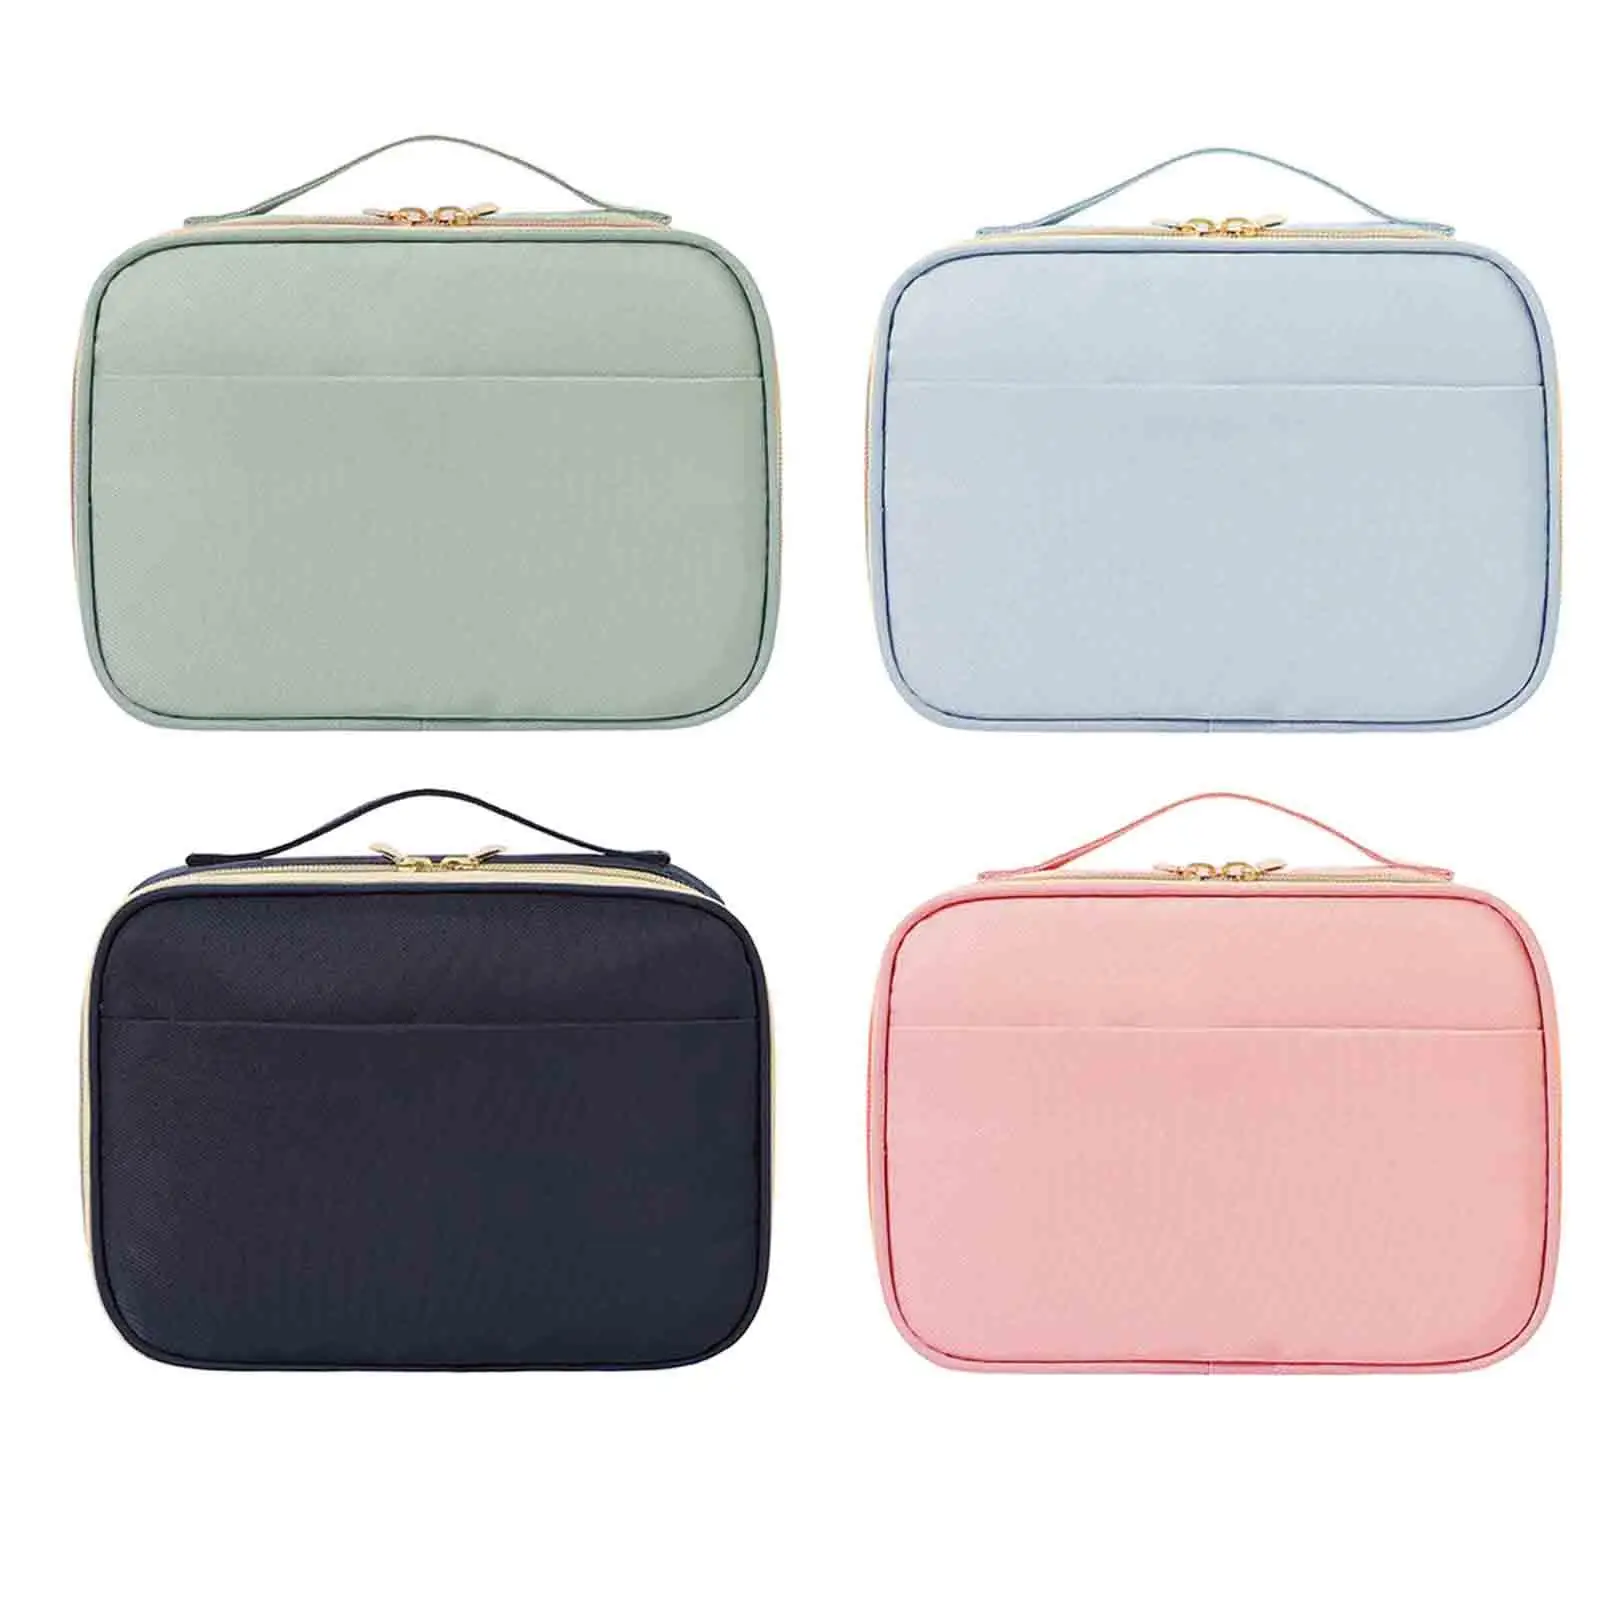 2 in 1 Makeup Bag Home Use Zipper Pouch Foldable Shower Organizer Kit Travel Toiletry Bag for Bathroom Toiletries Traveling